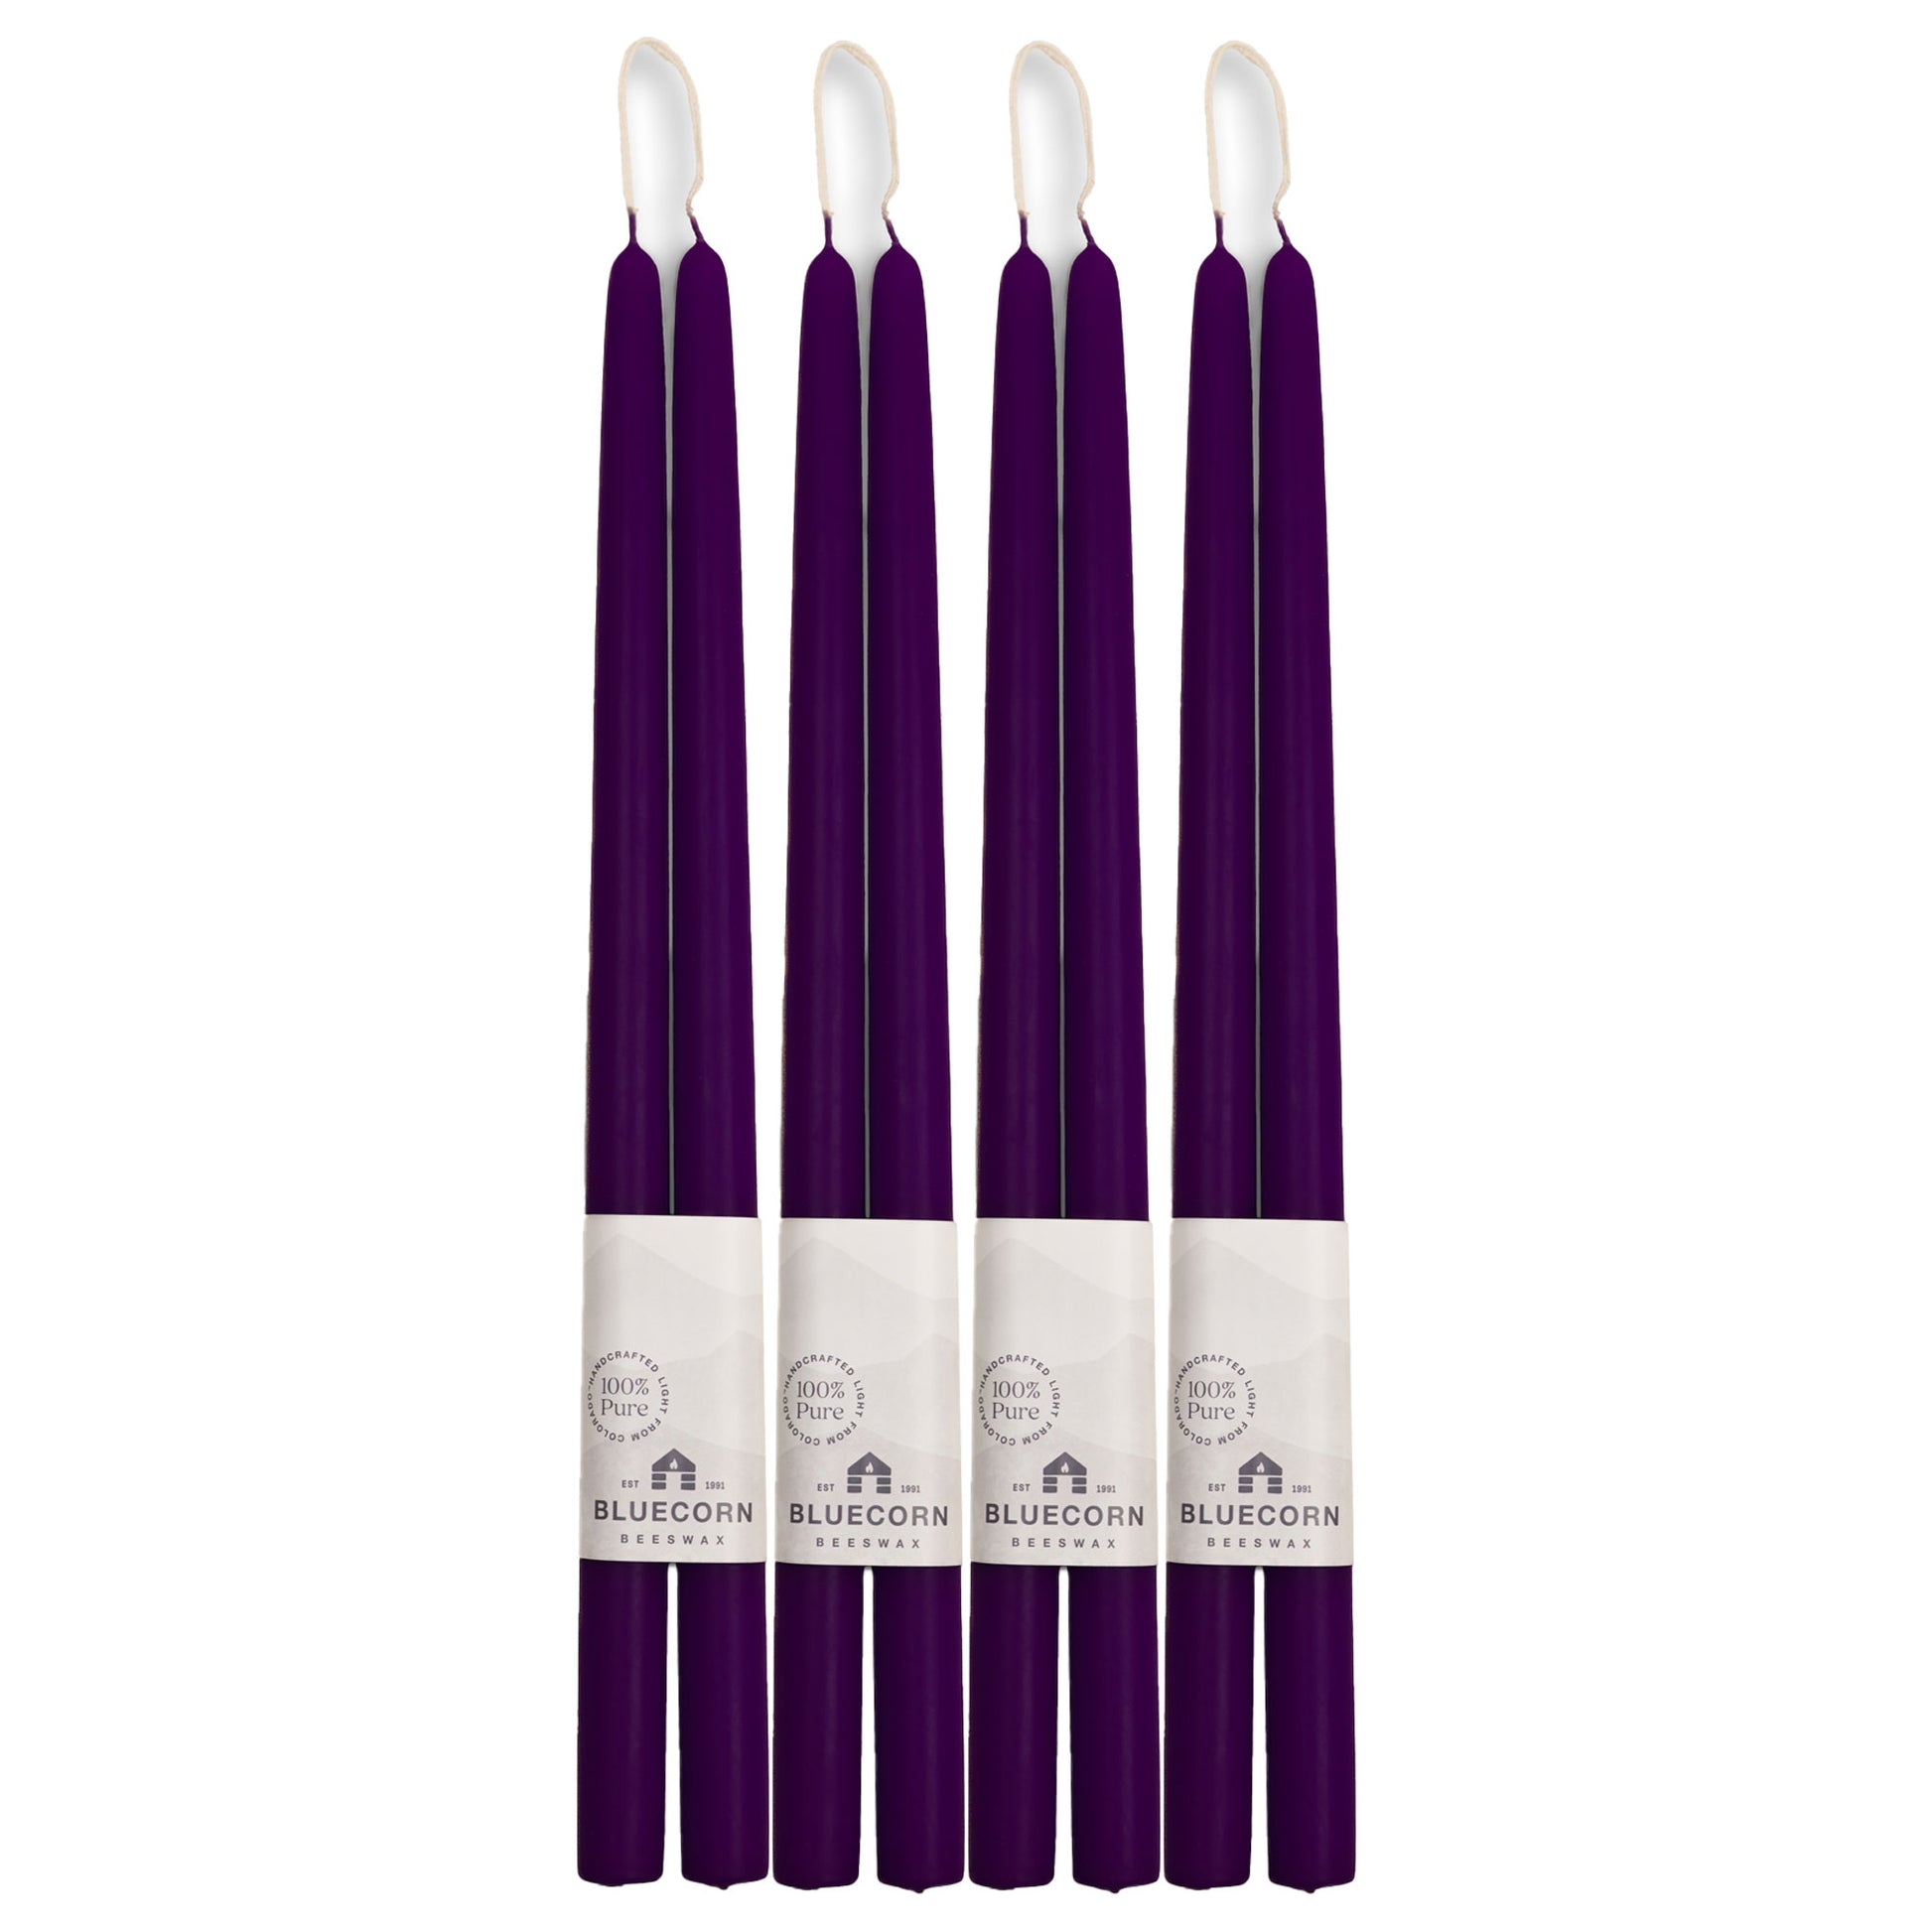 bluecorn beeswax taper candles in eggplant long tapers dramatic dark tapers